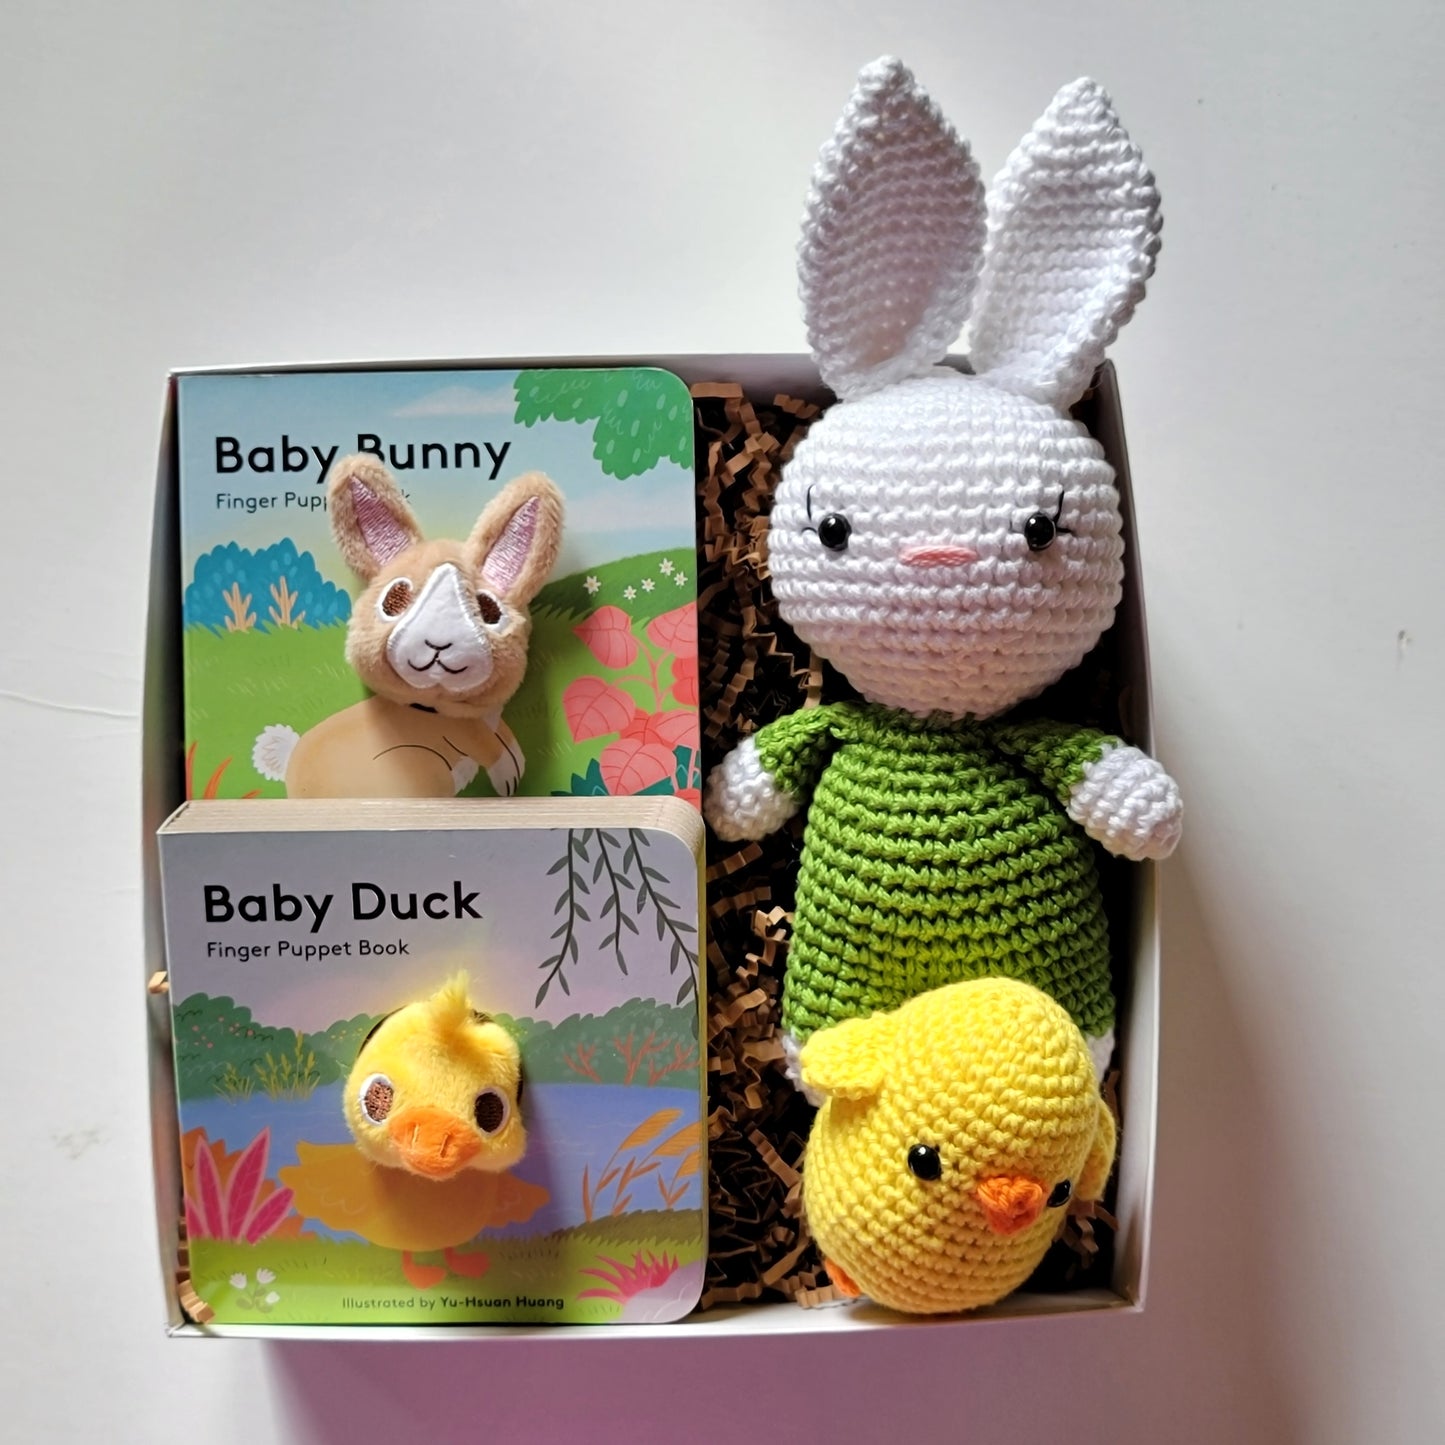 Easter Gift Set for Little Ones: Sugar-Free Treats for Ages 0-3